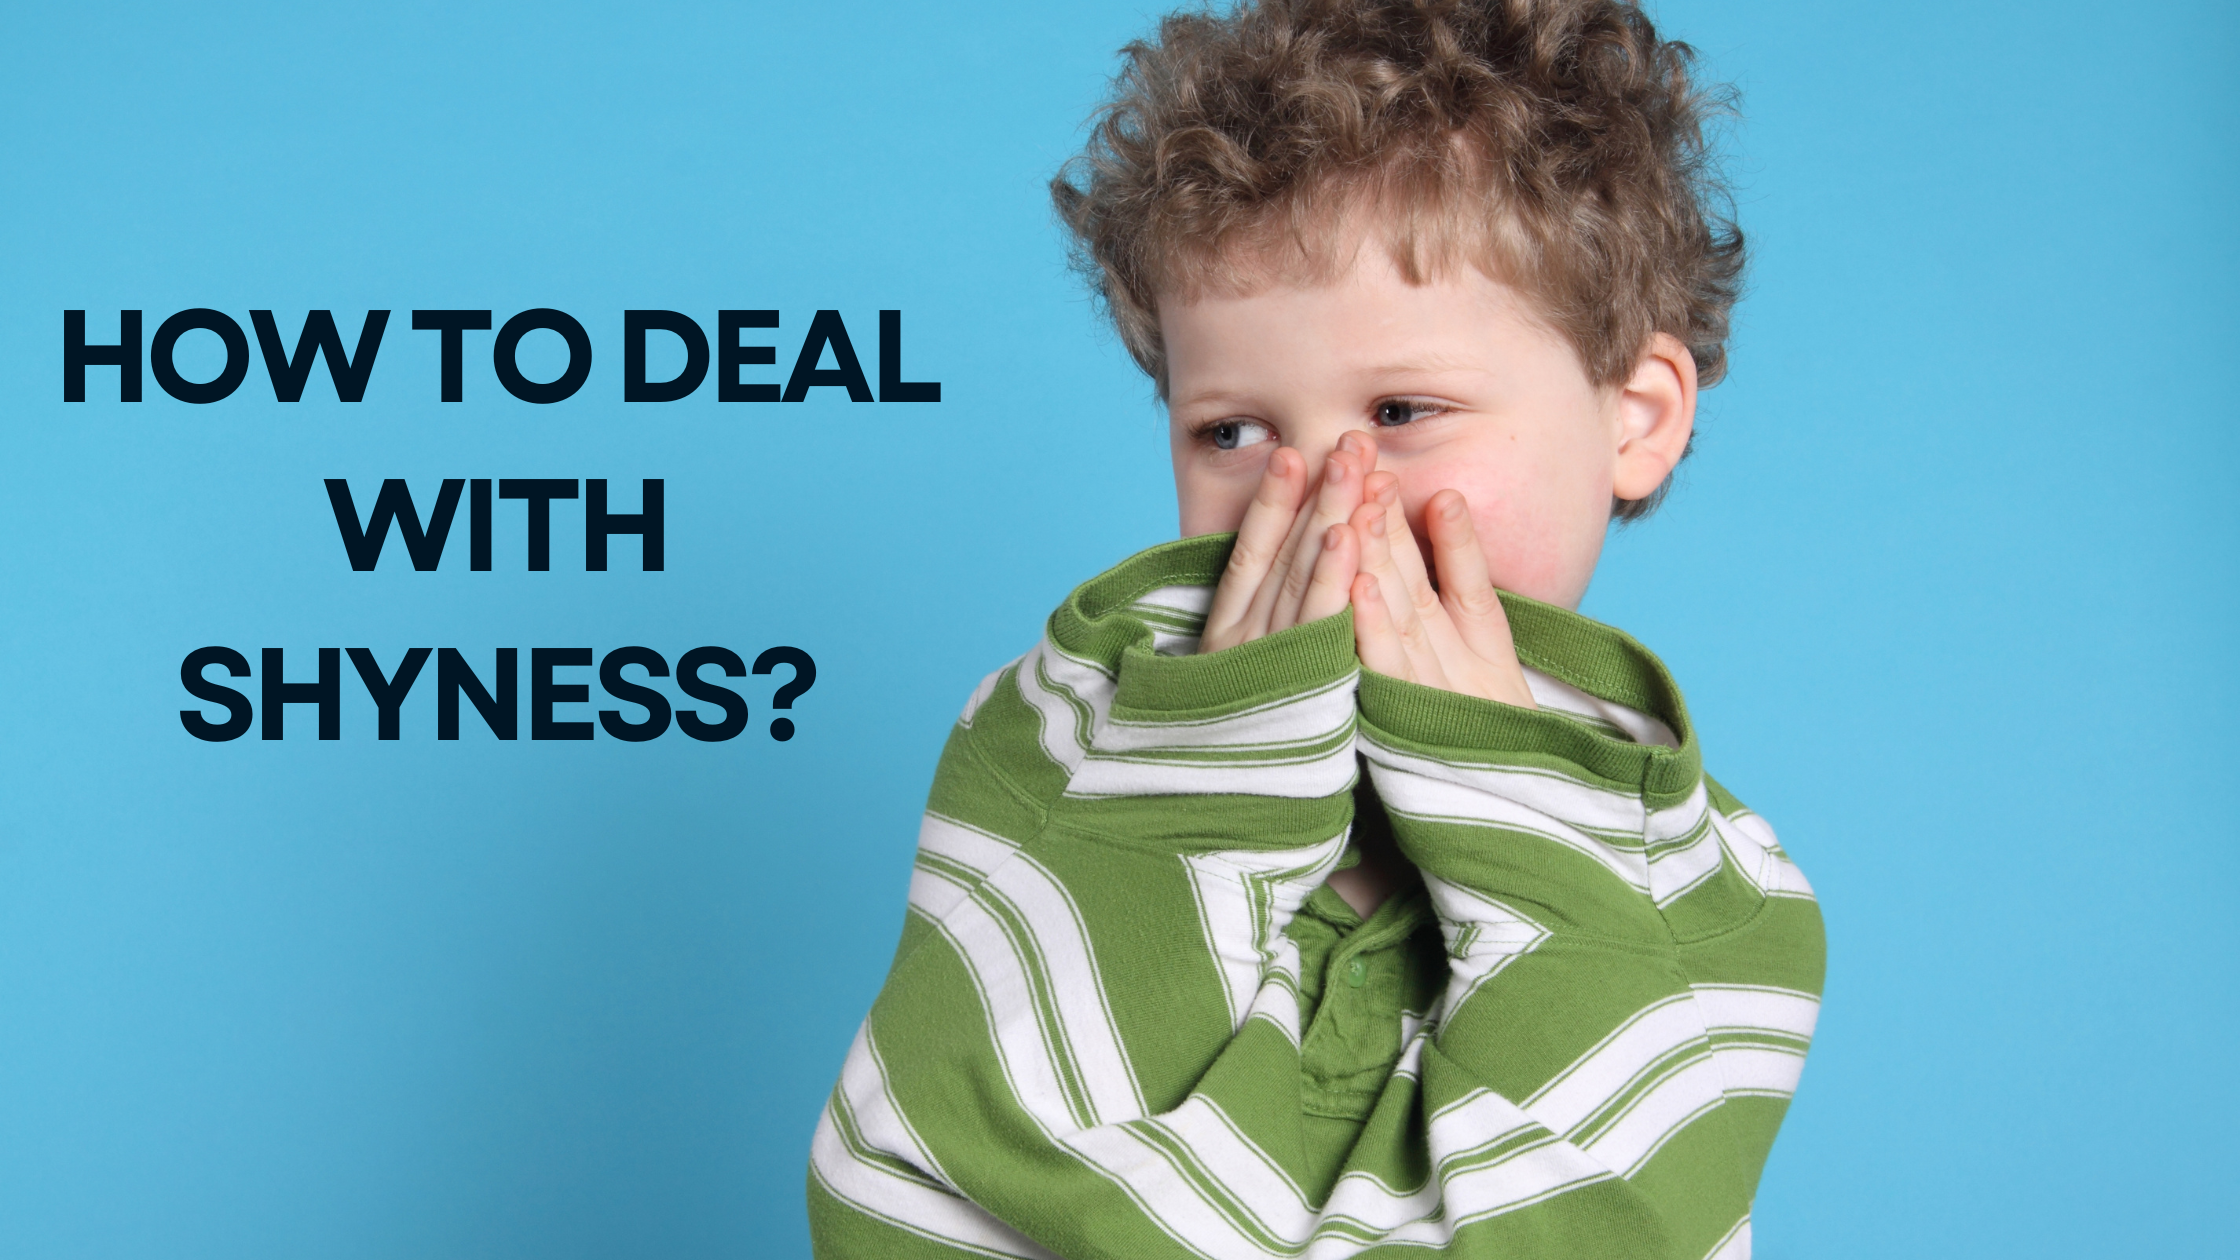 How to Deal With Shyness